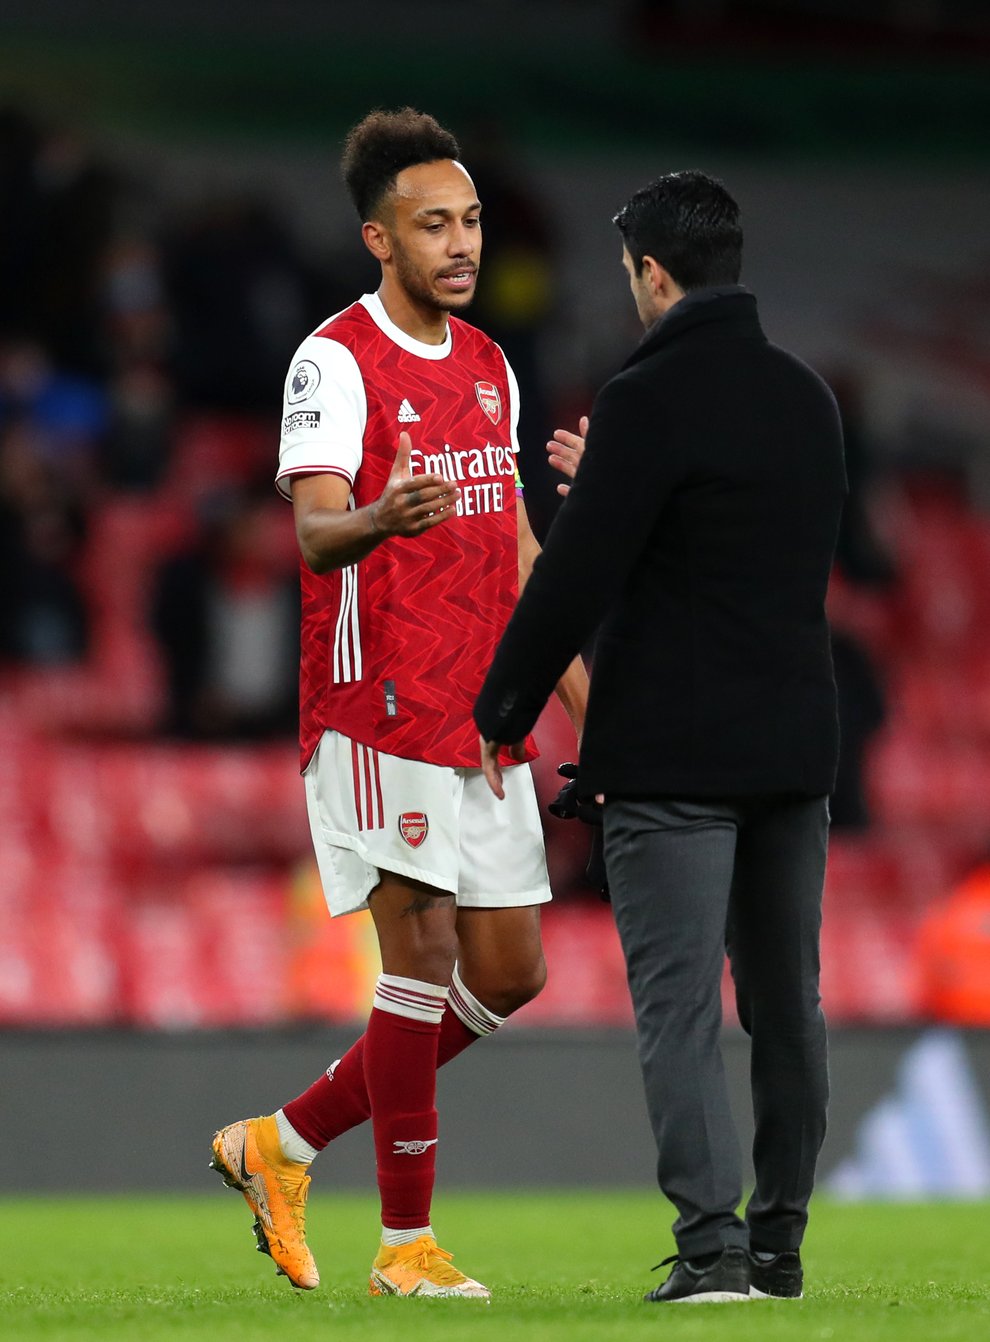 Arsenal manager Mikel Arteta believes Pierre-Emerick Aubameyang, lft, has responded well to "difficult moments" recently